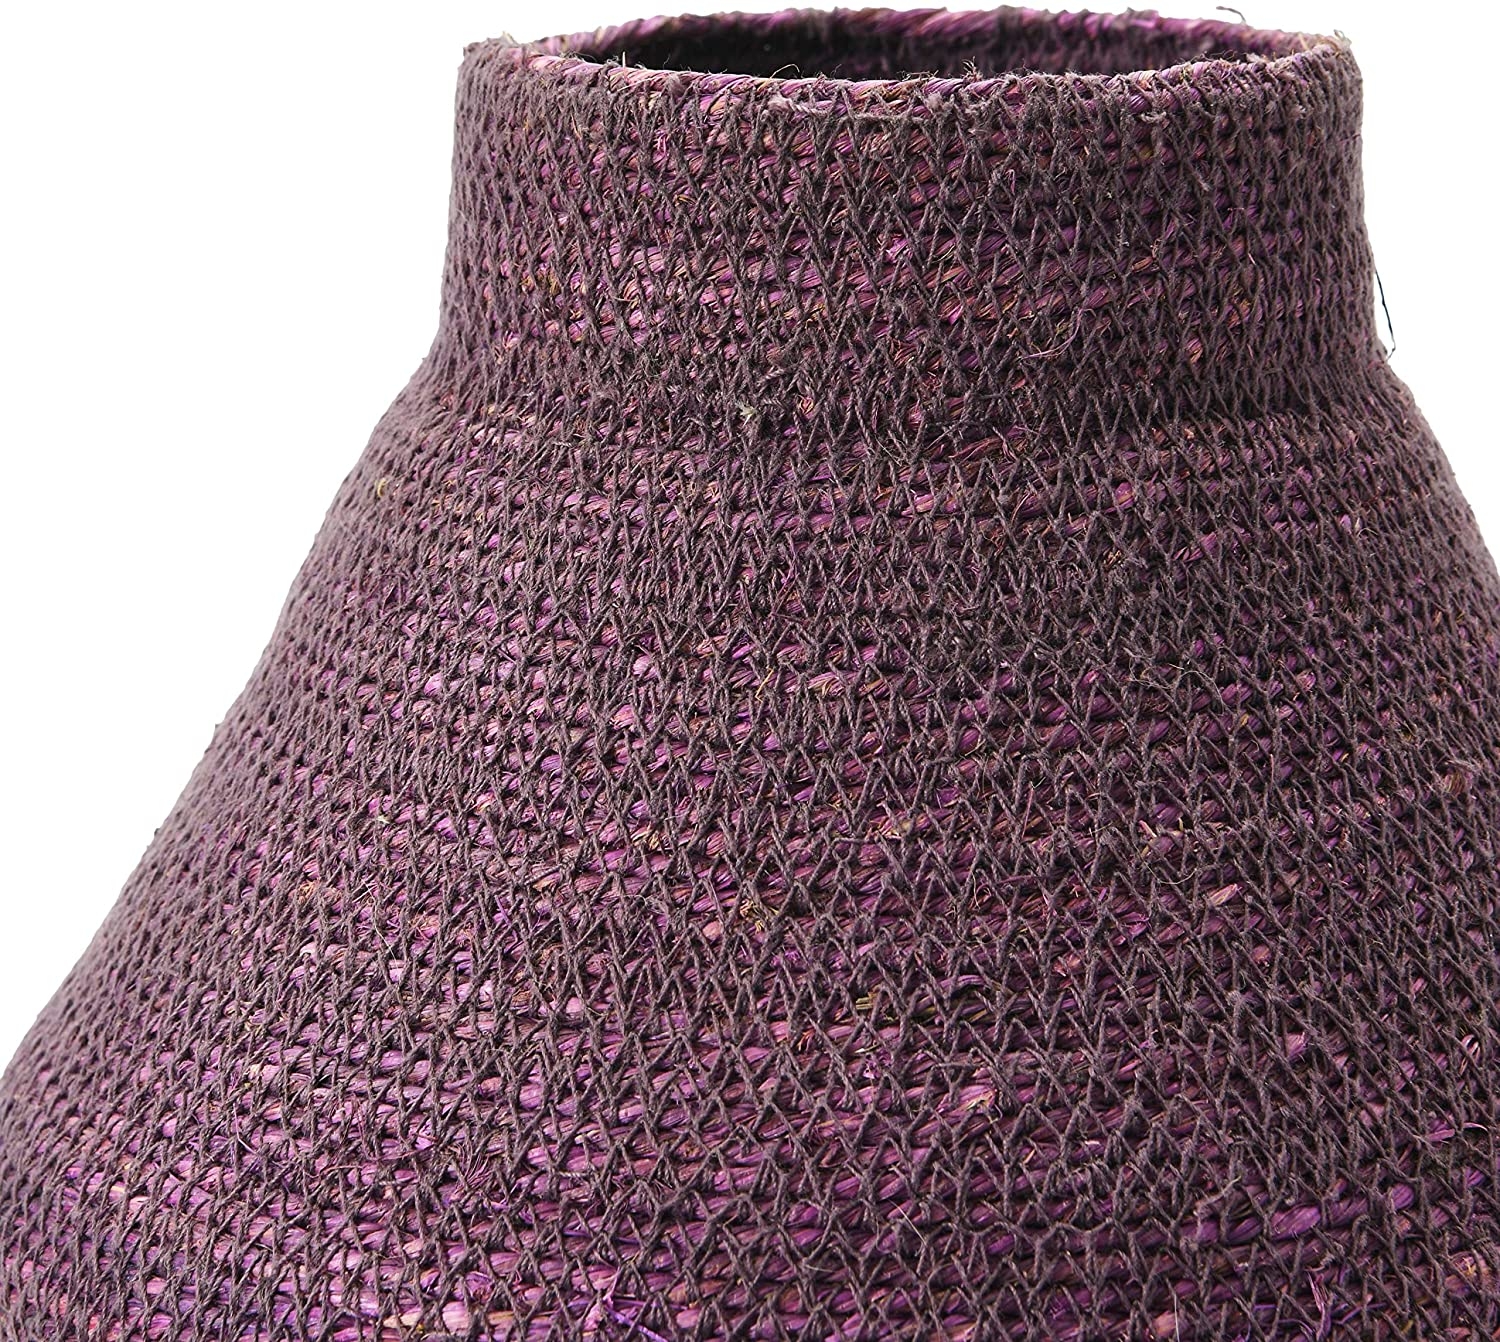 Fluted Woven Seagrass Basket, Plum - Image 3